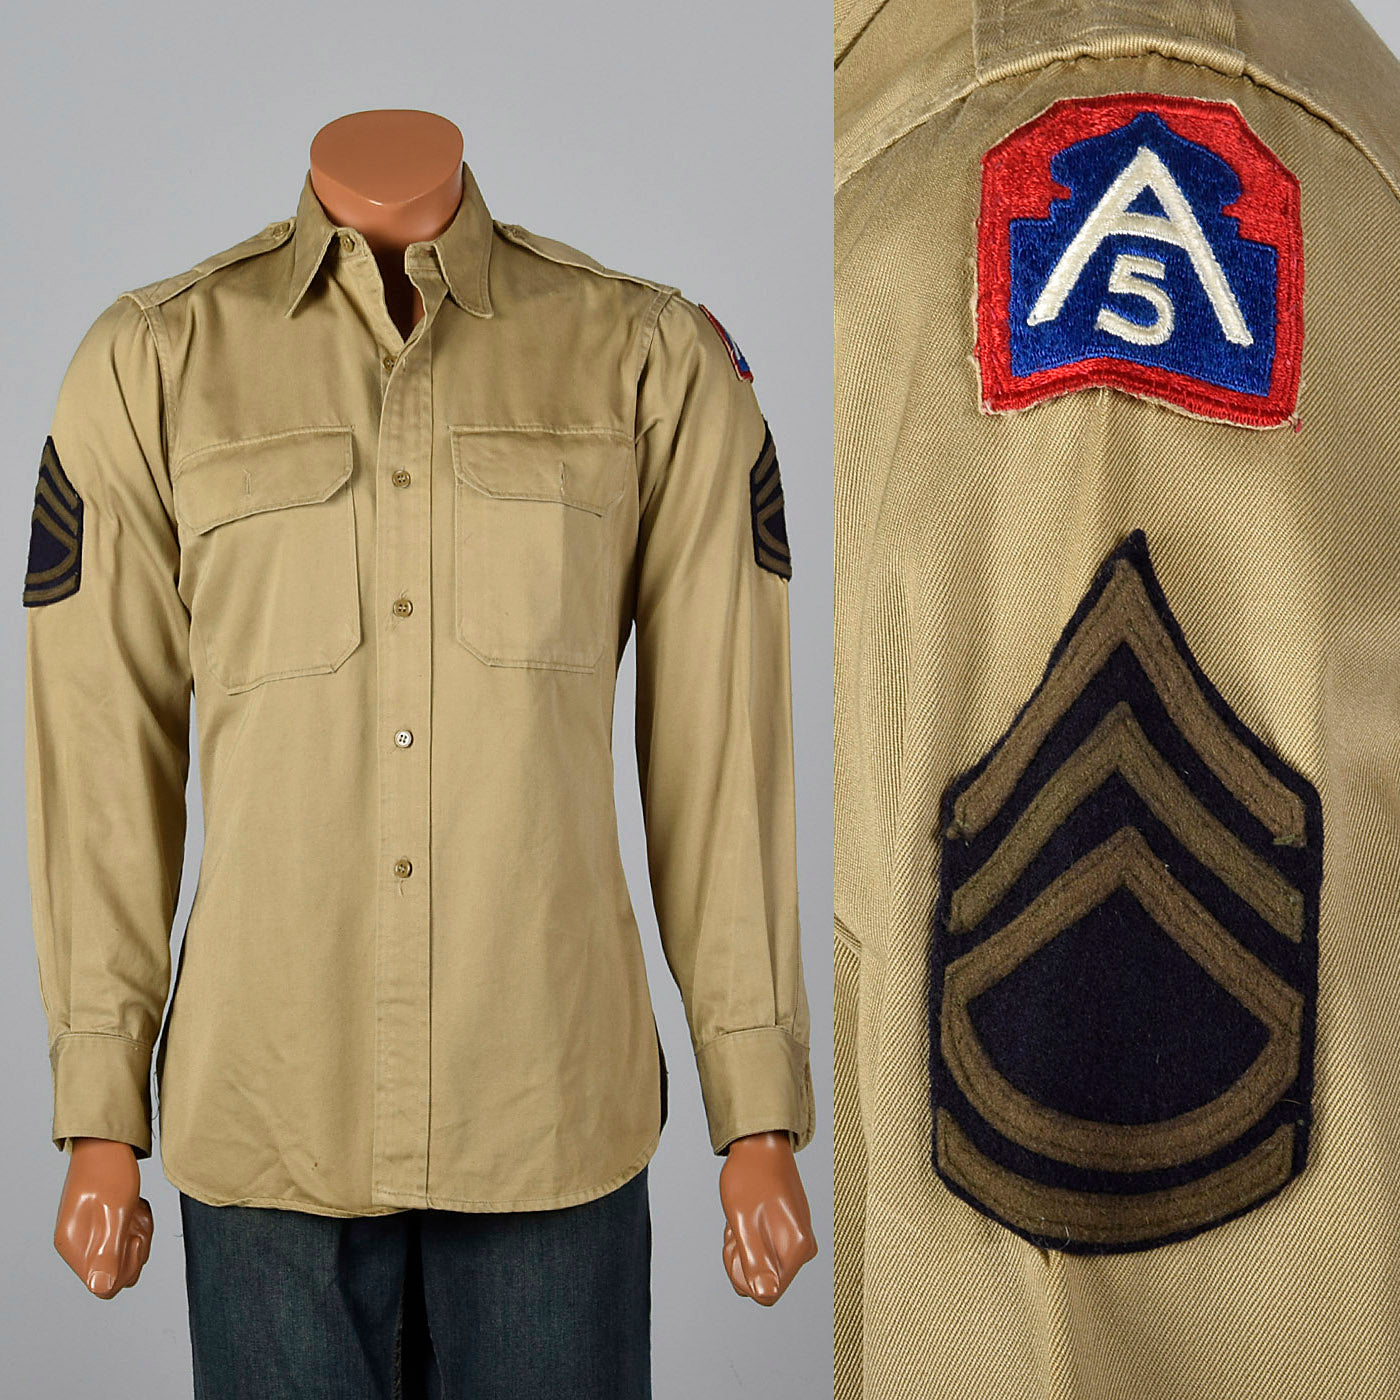 1940s Cotton US Military Shirt with Patches